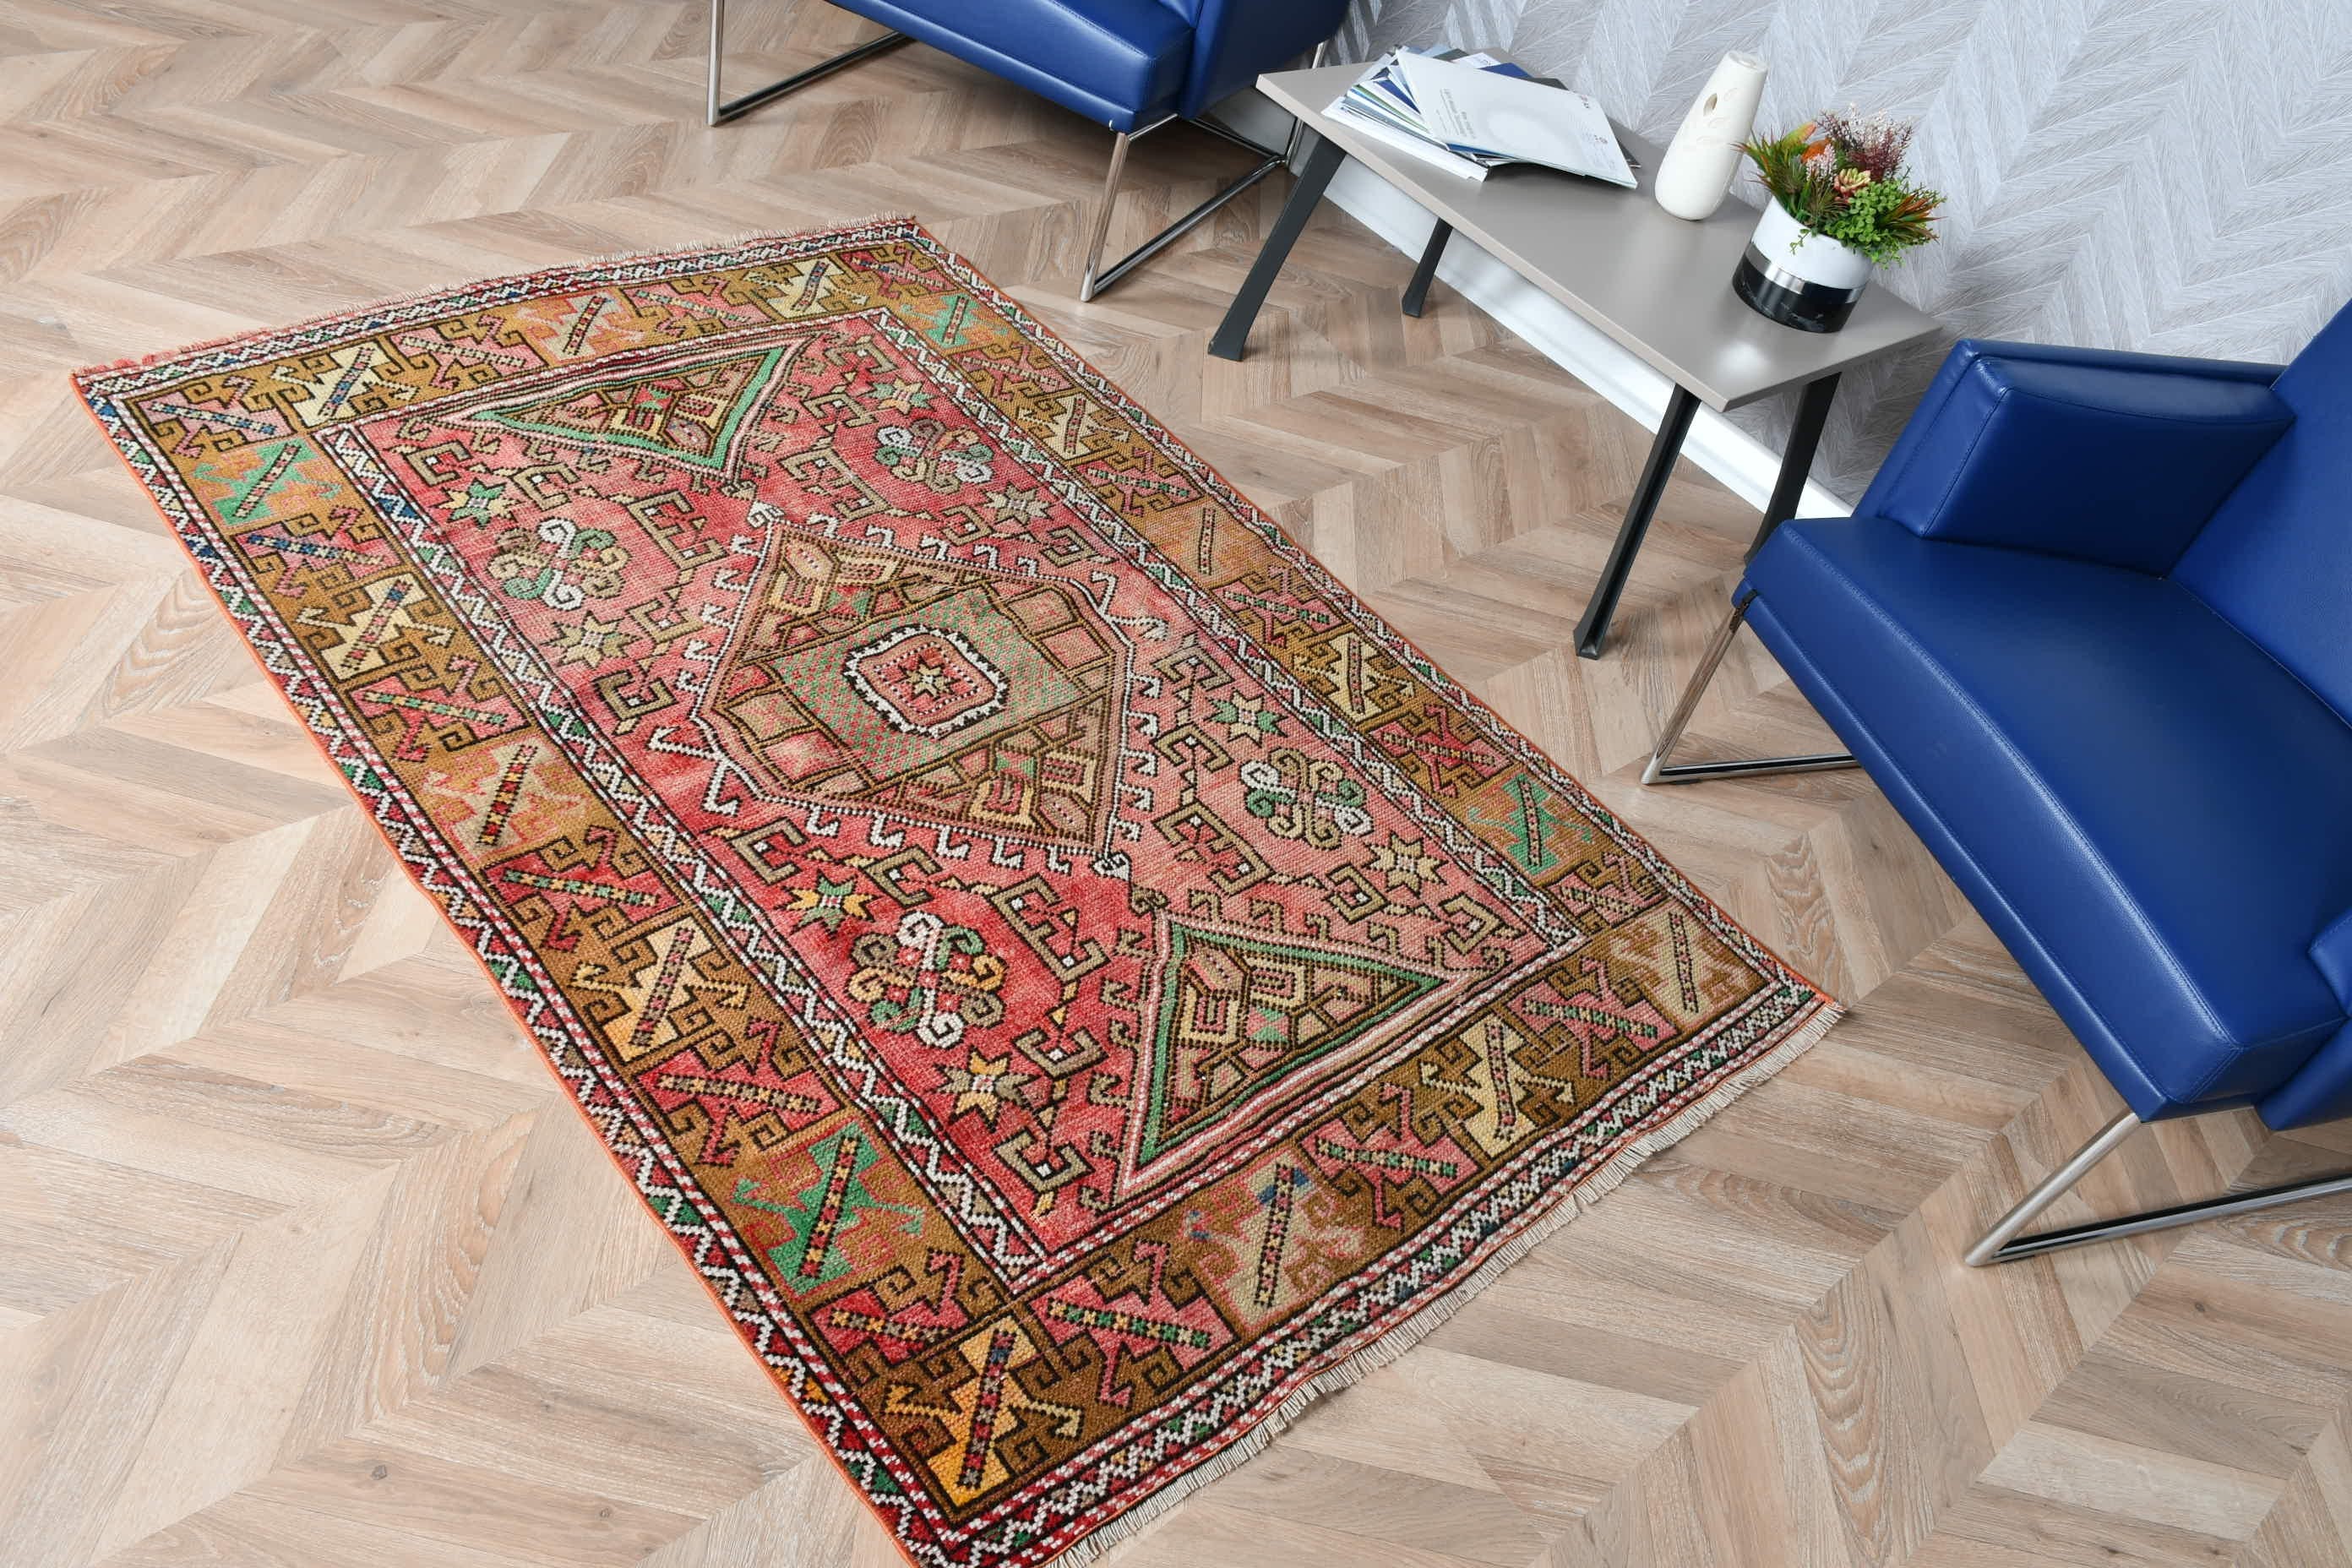 Vintage Rug, Turkish Rugs, Antique Rugs, Nursery Rug, 3.8x5.7 ft Accent Rugs, Bedroom Rug, Red Kitchen Rug, Rugs for Kitchen